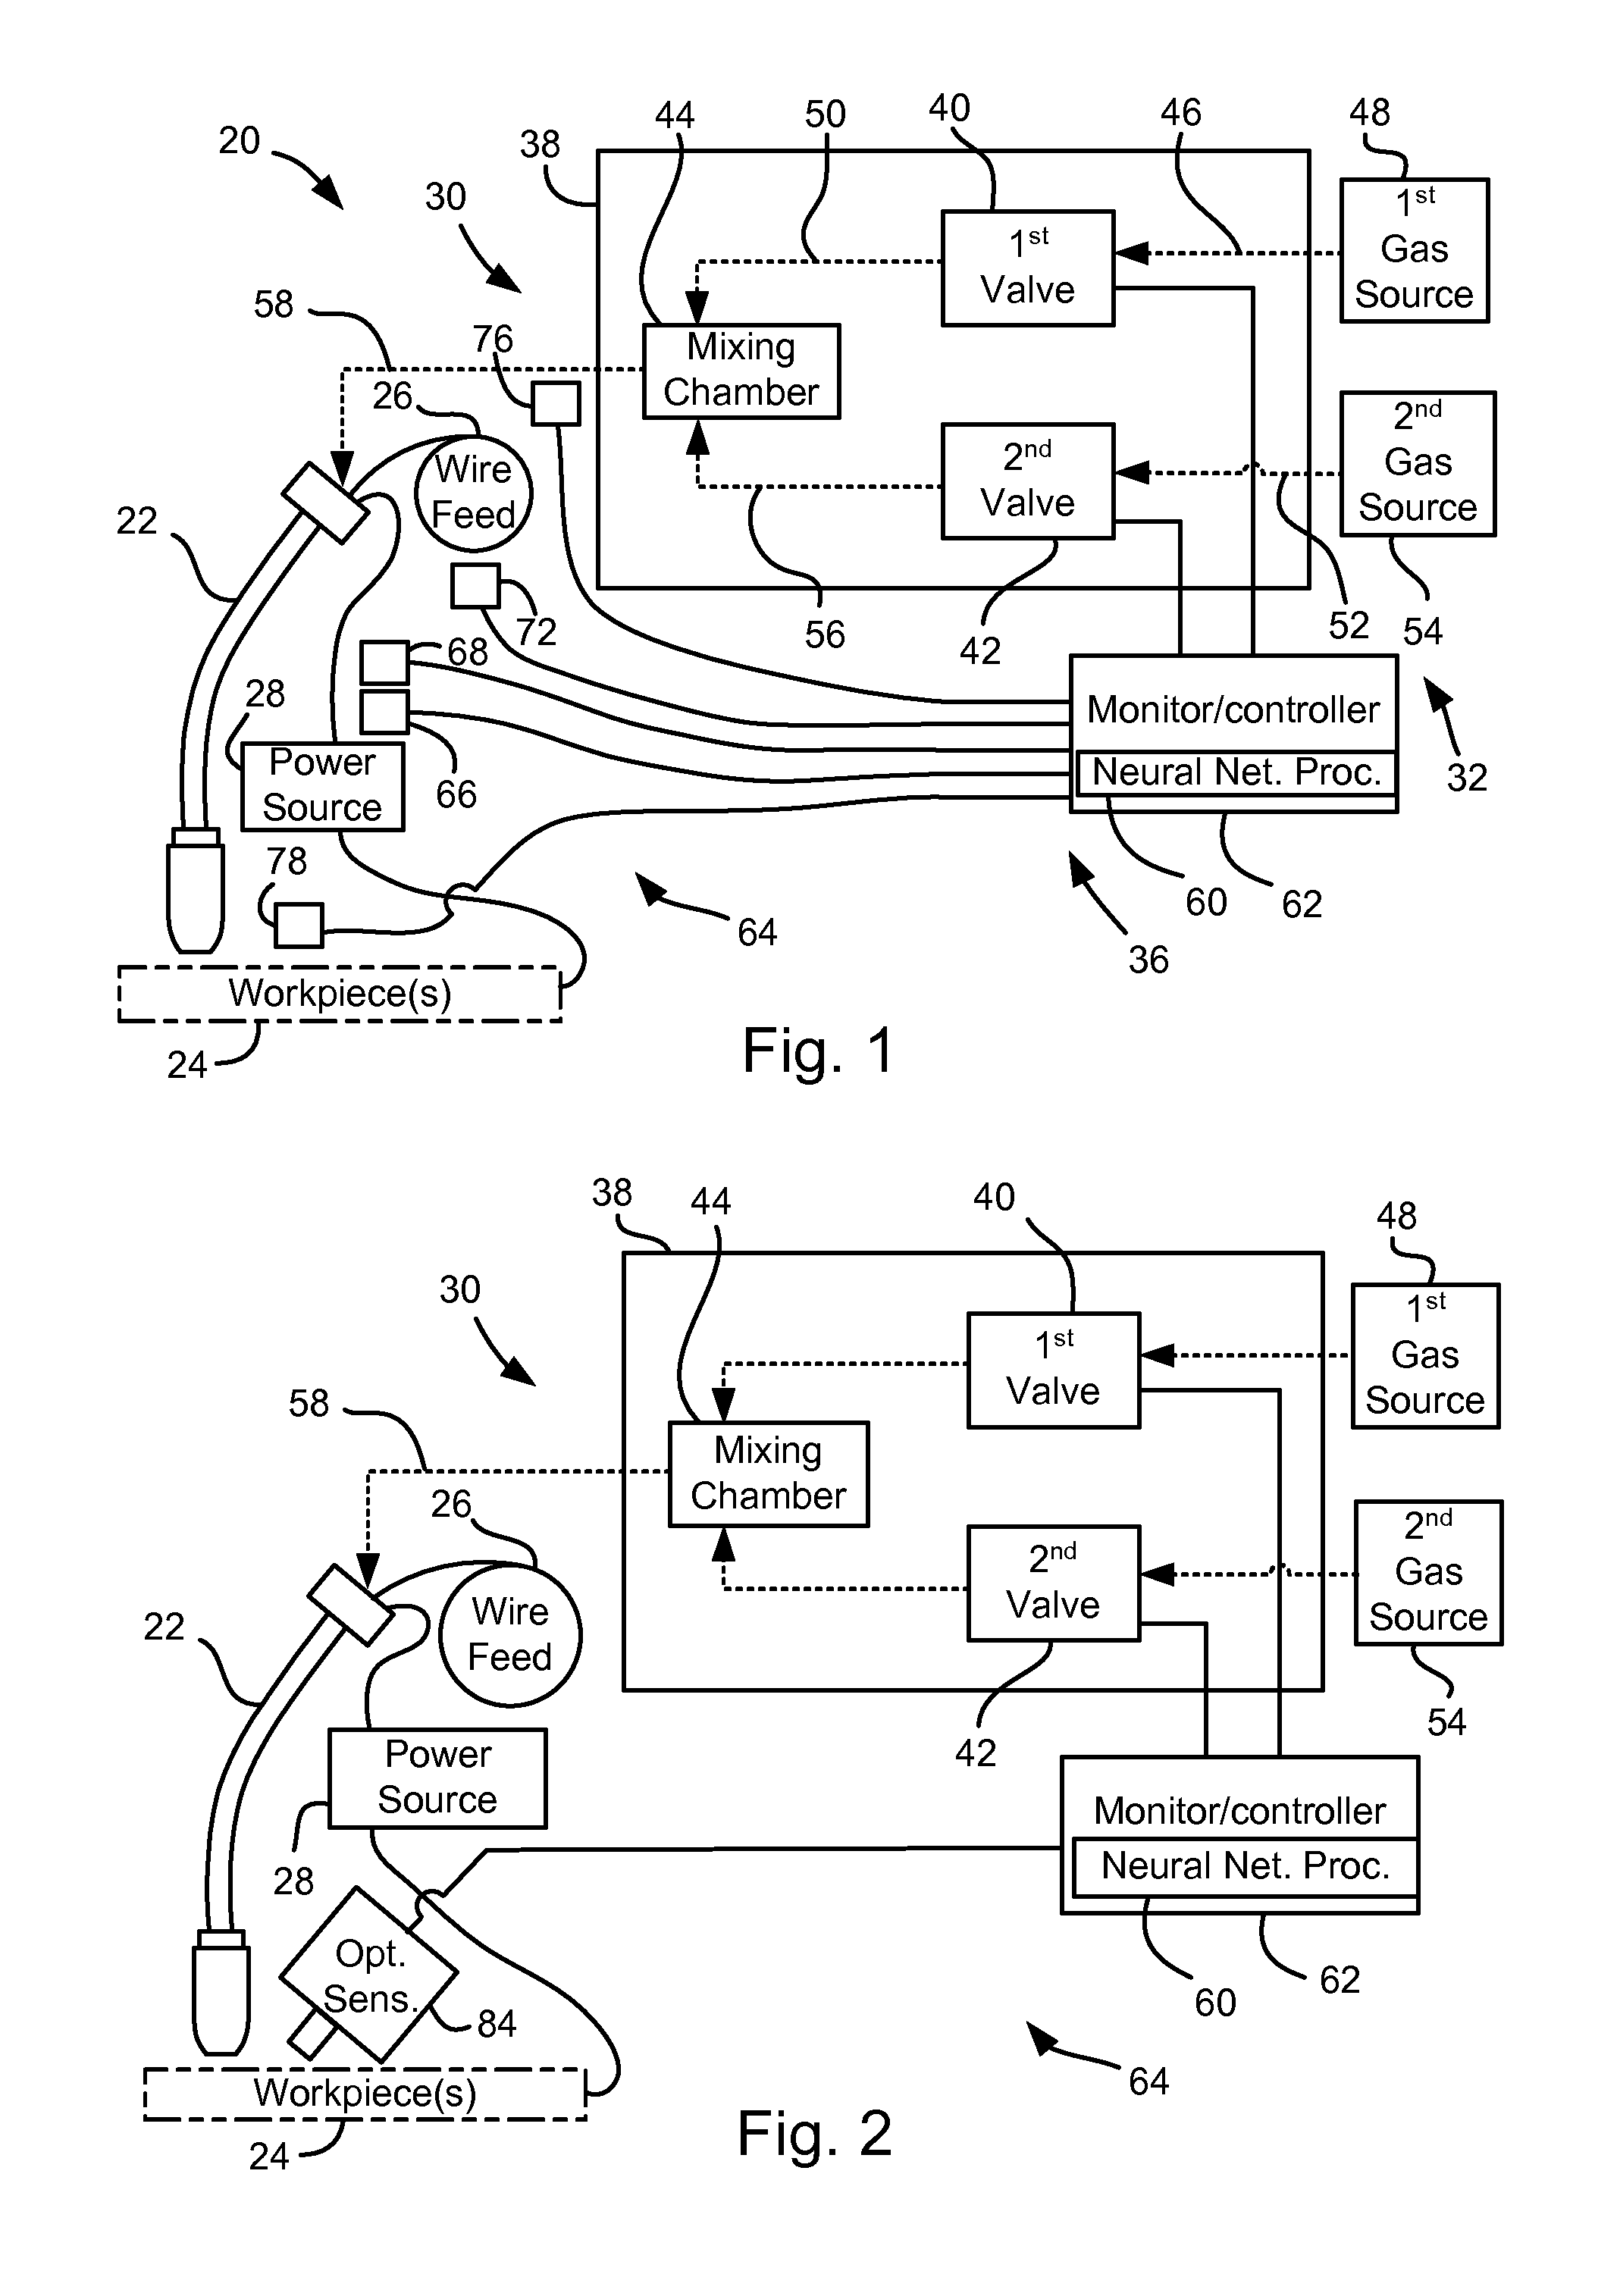 Welding stability system and method